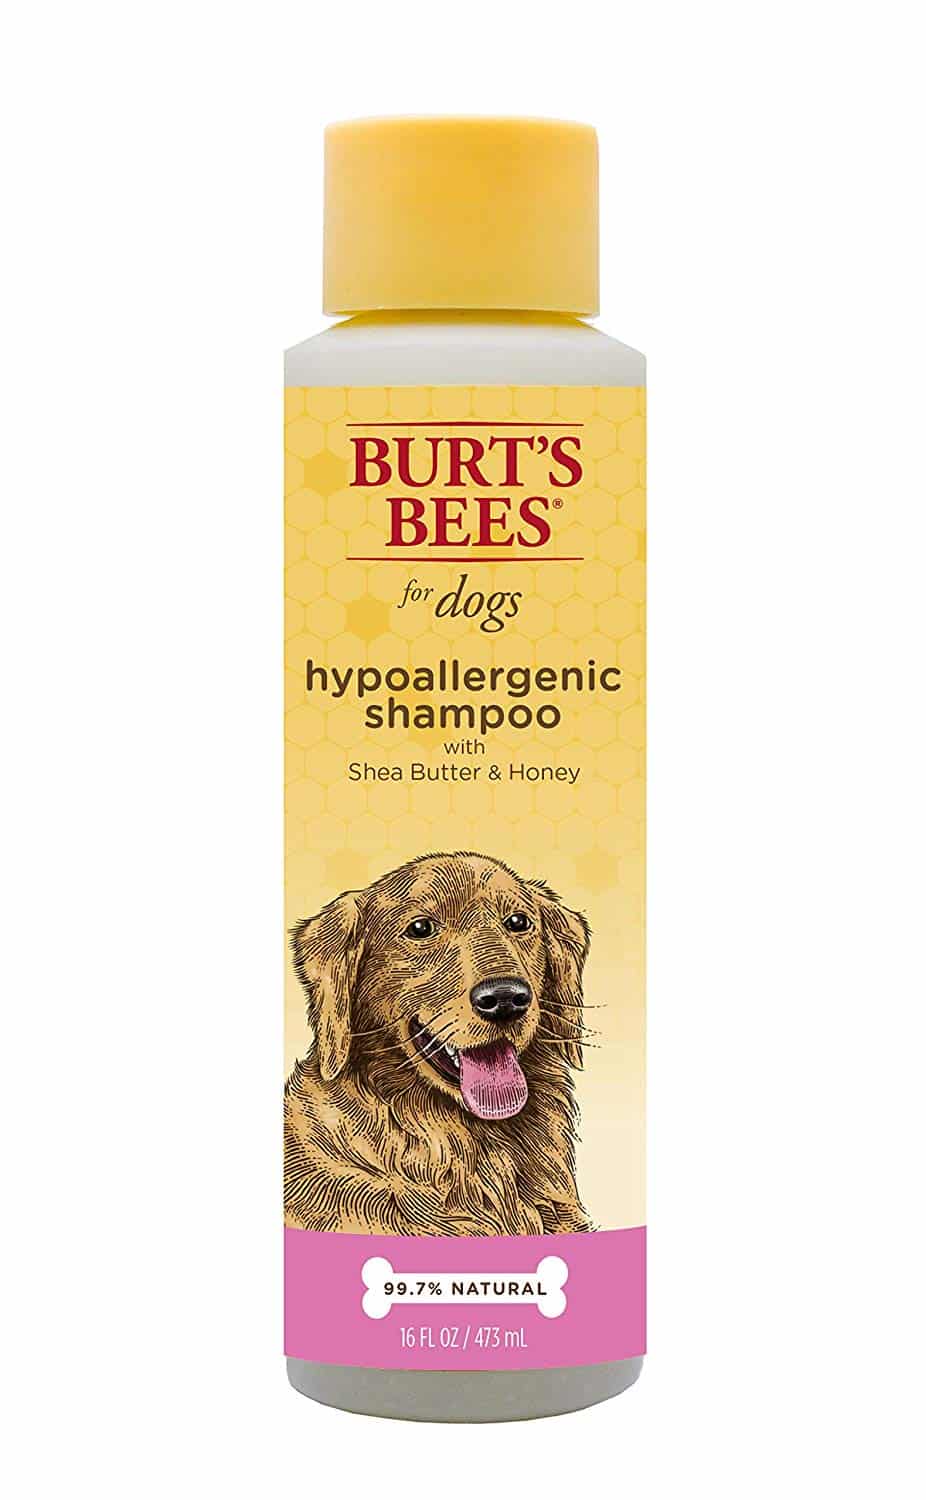 Burt's Bees for Dogs